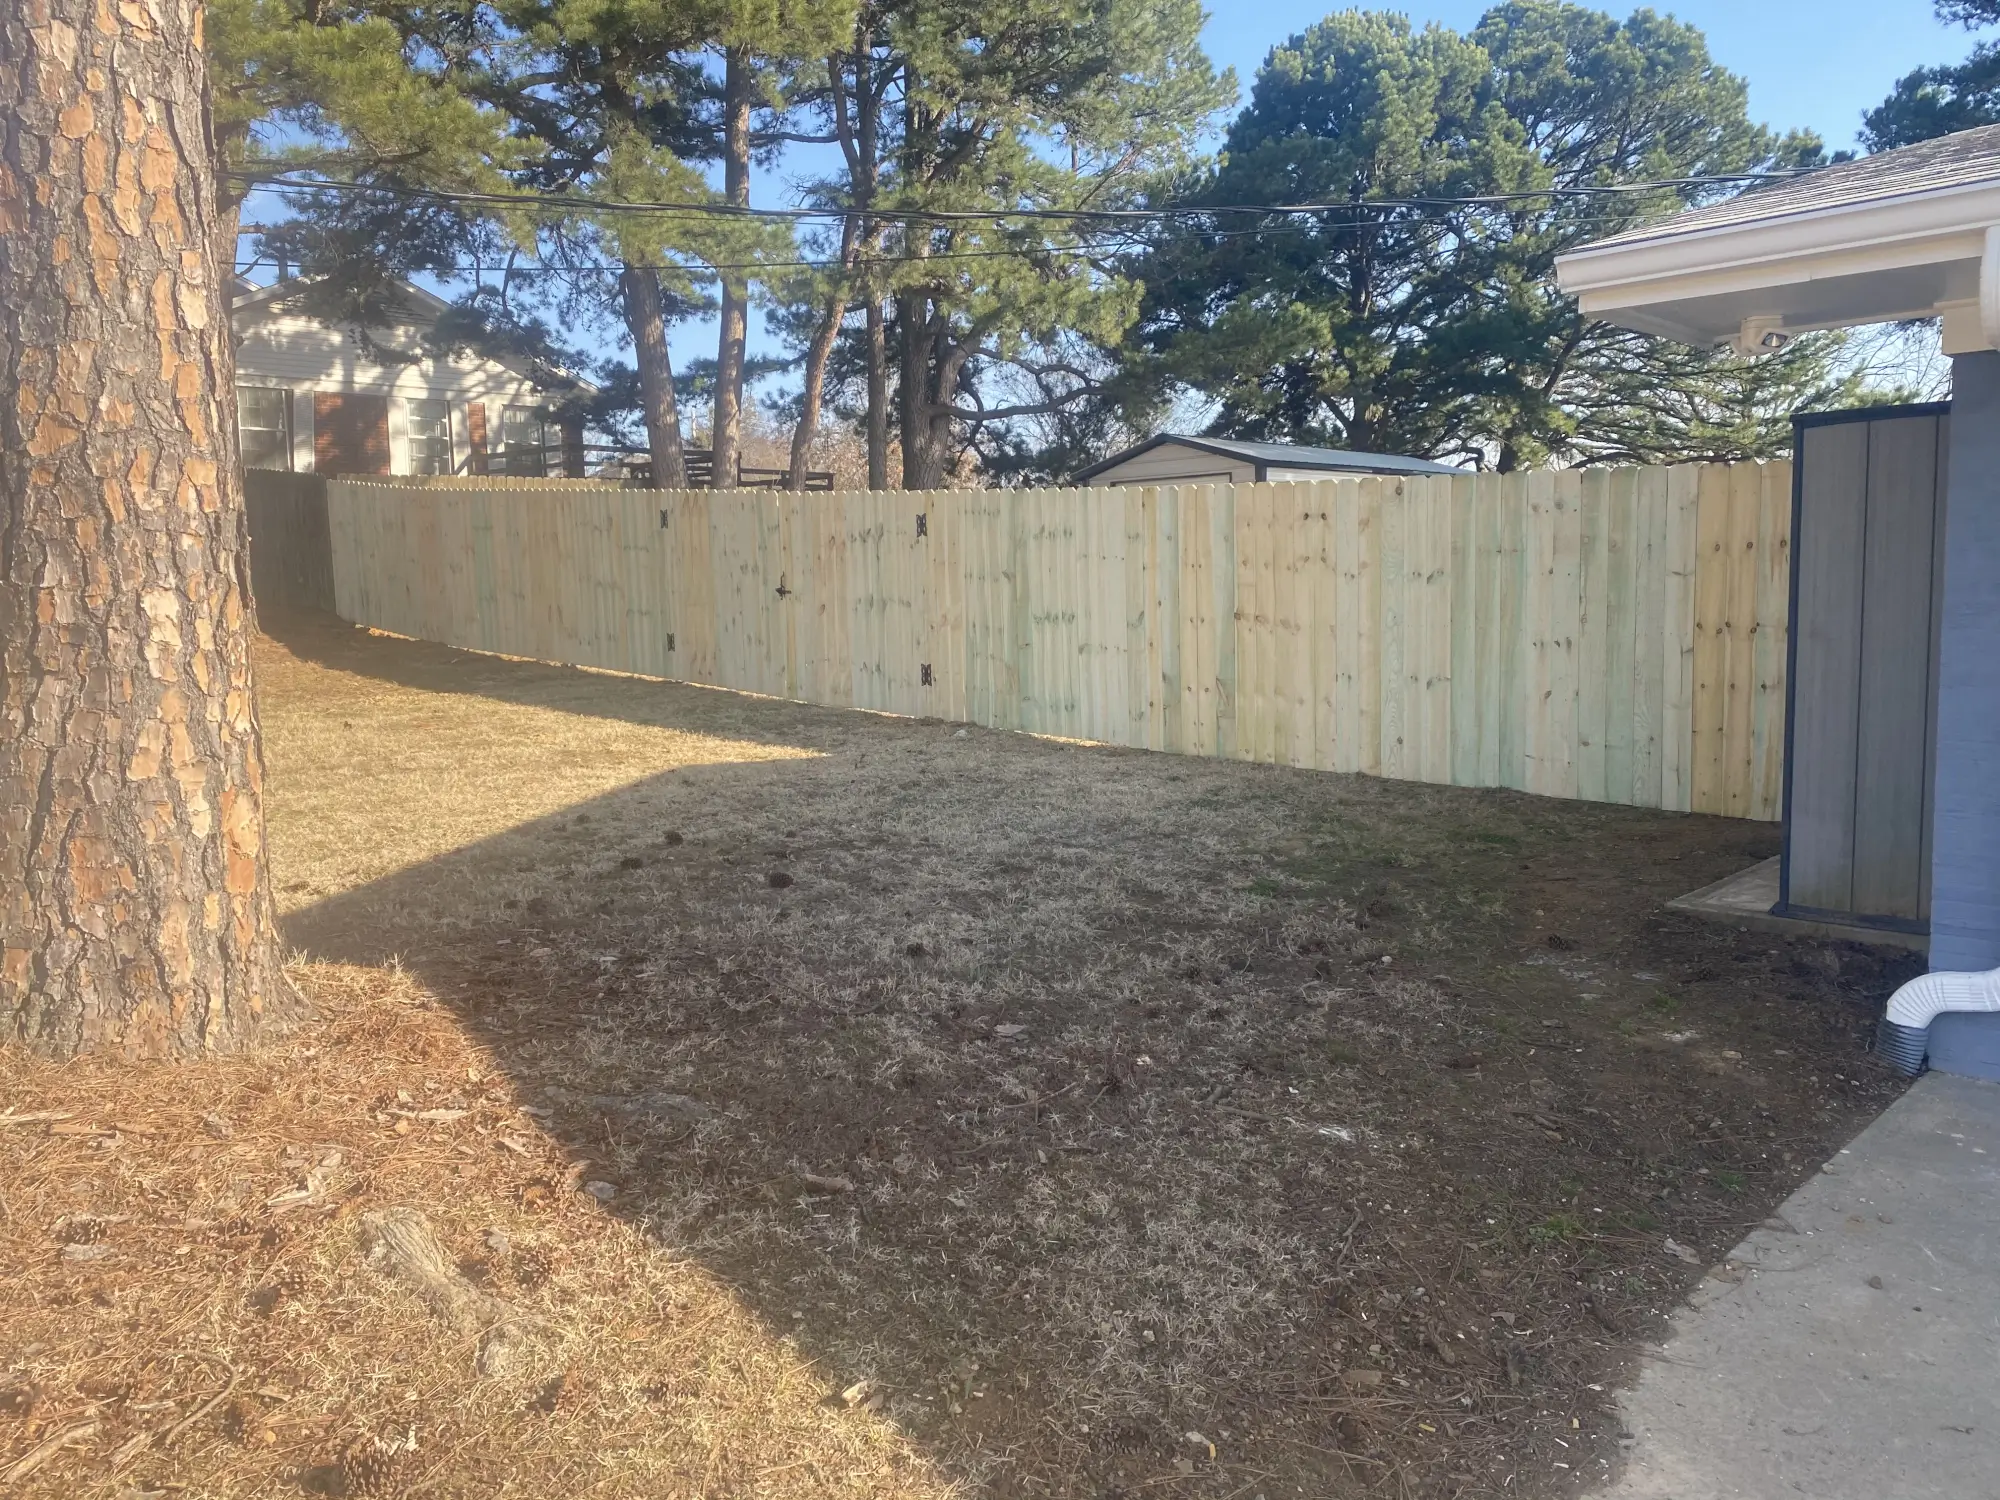 Residential wooden fence